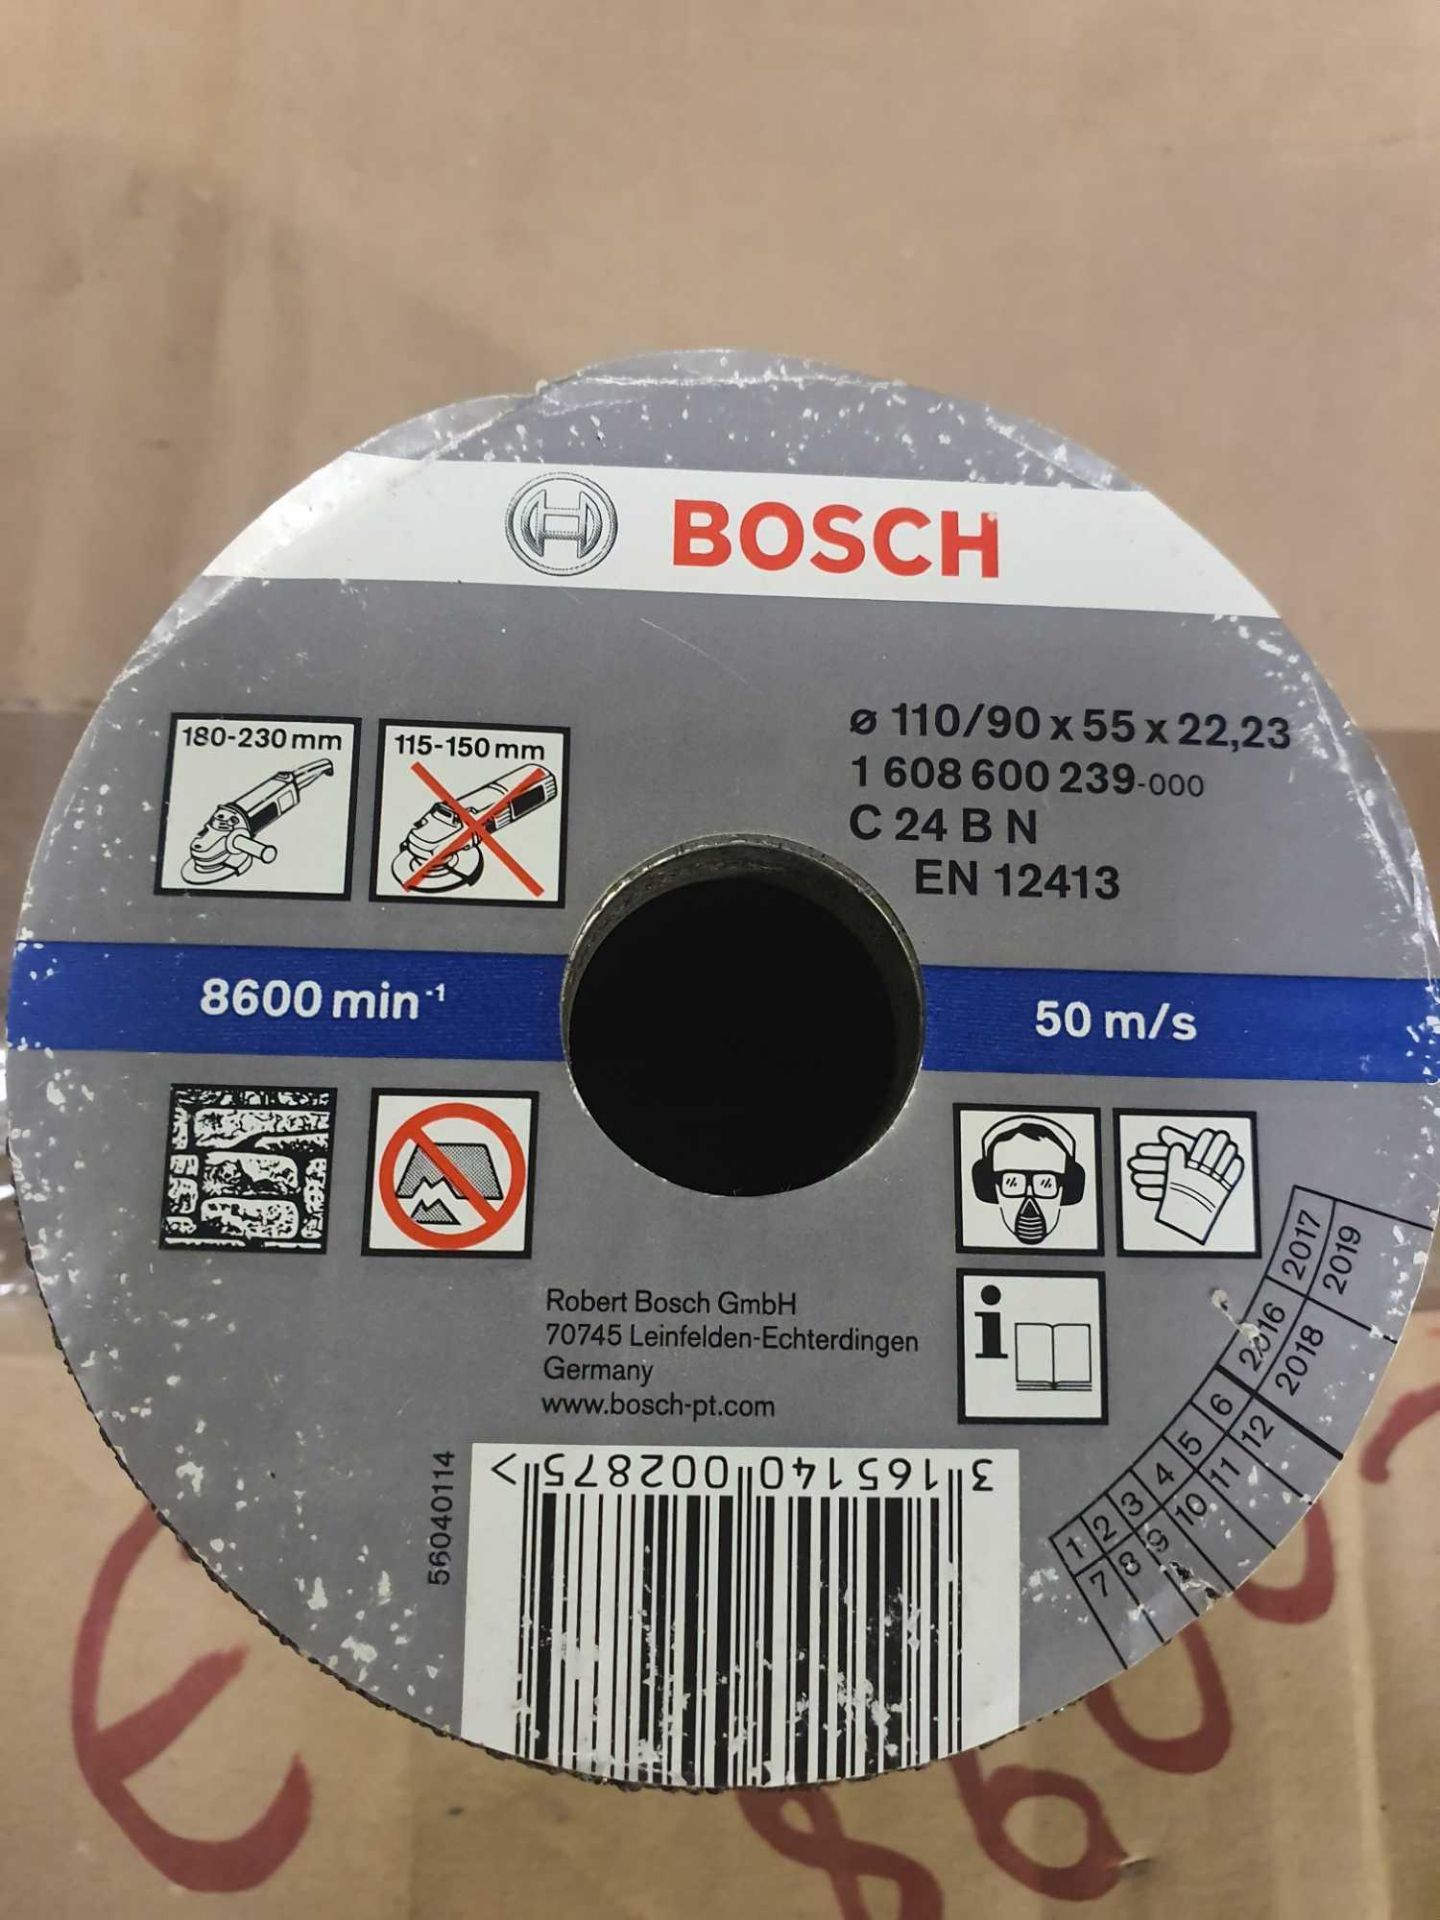 10 x Bosch concrete polisher discs for grinder - Image 2 of 4